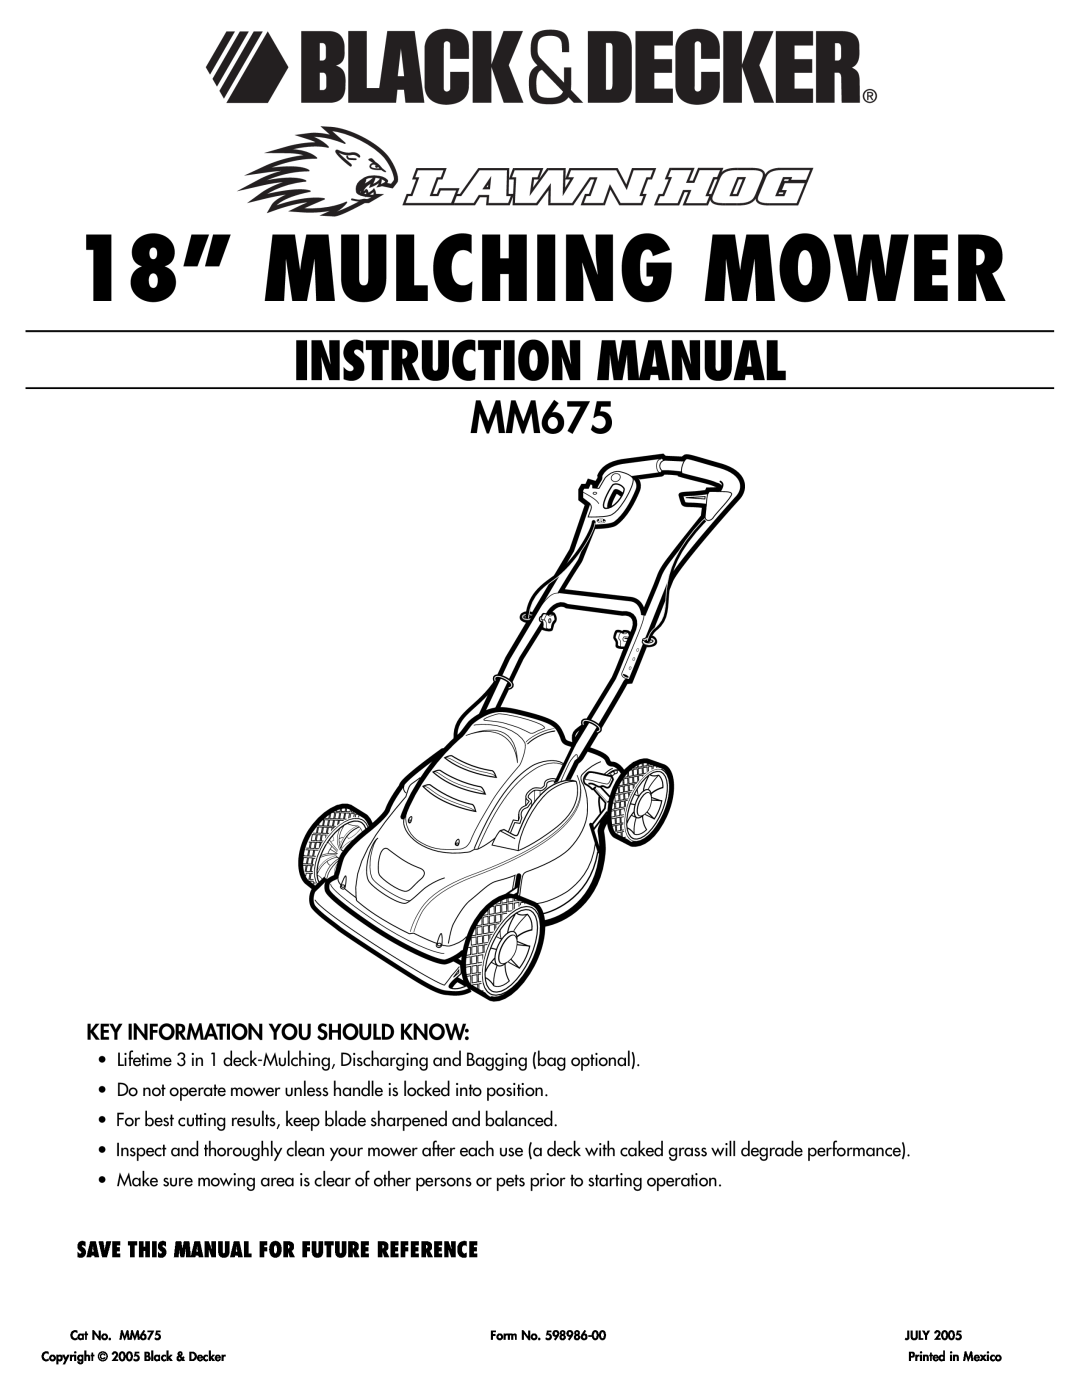 COBY electronic MM675 instruction manual Save This Manual For Future Reference, 18” MULCHING MOWER 